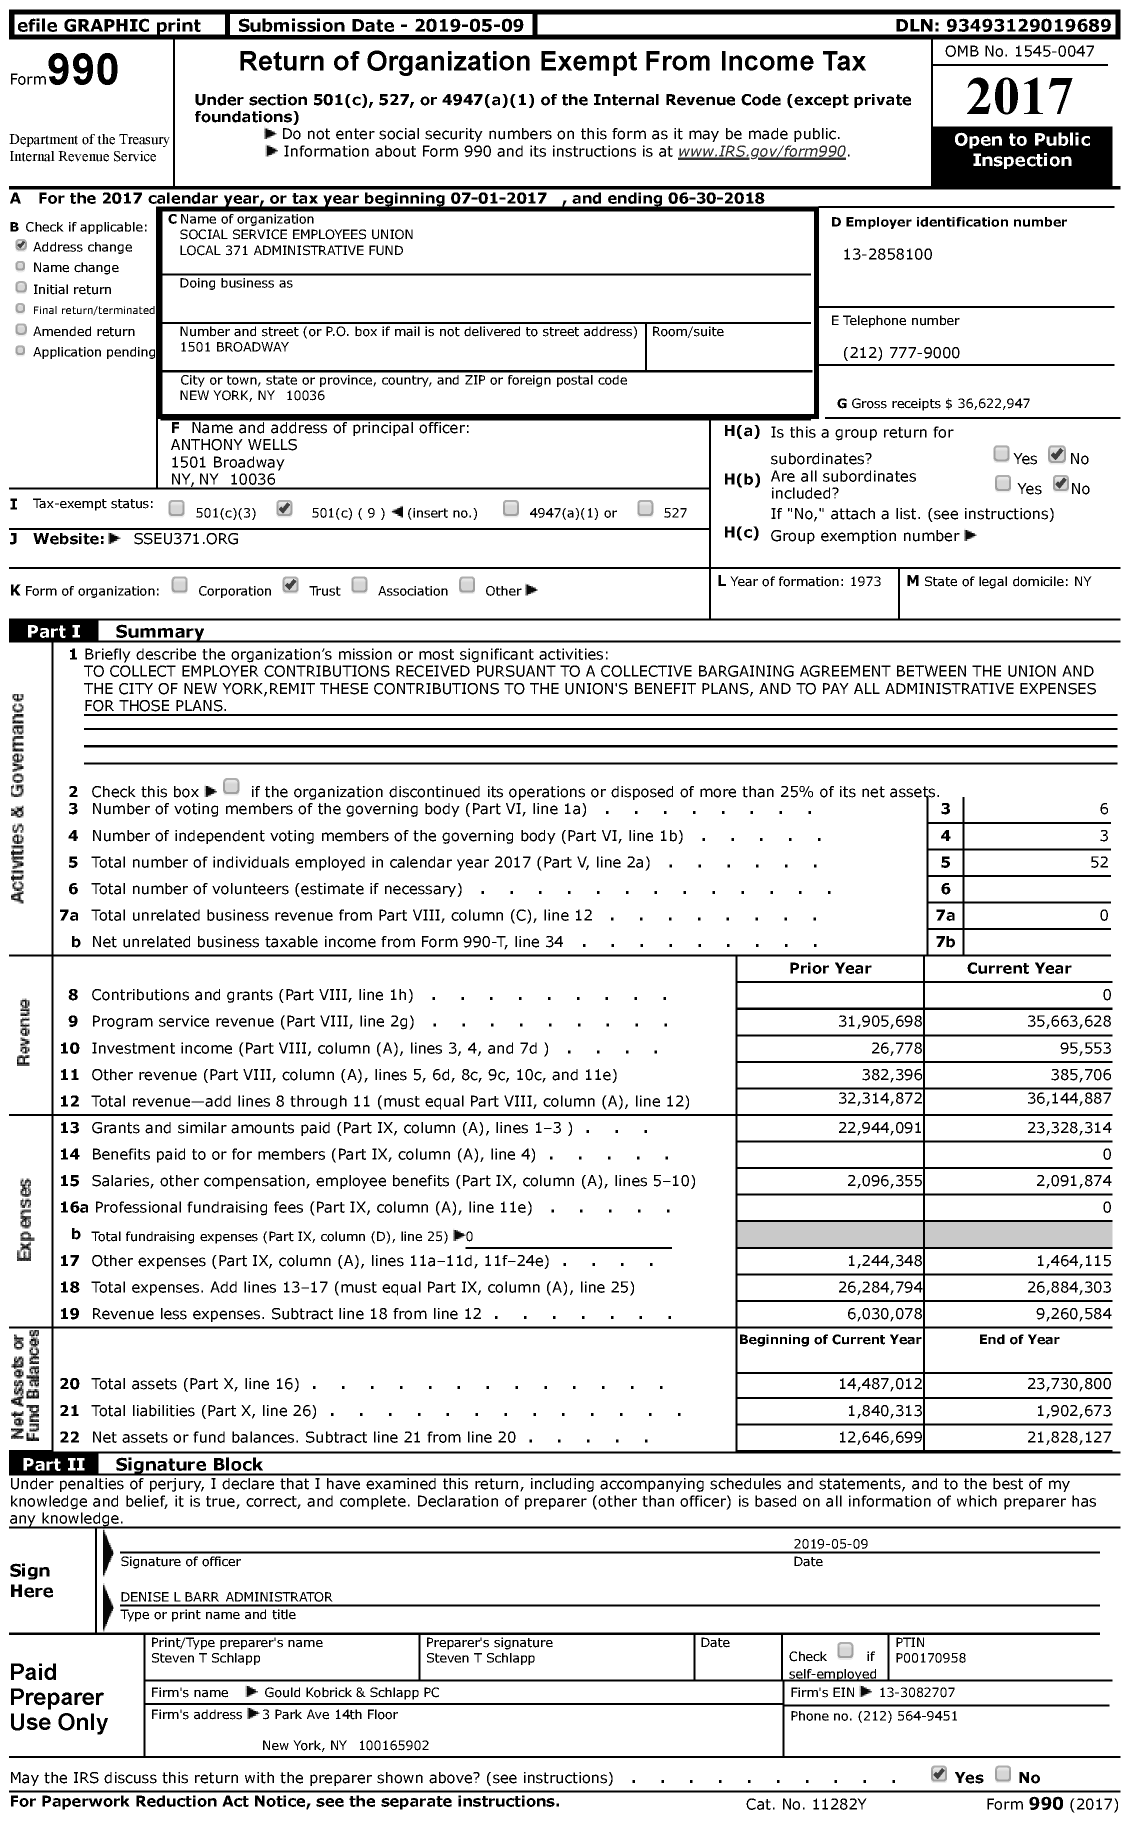 Image of first page of 2017 Form 990 for Social Service Employees Union Local 371 Administrative Fund